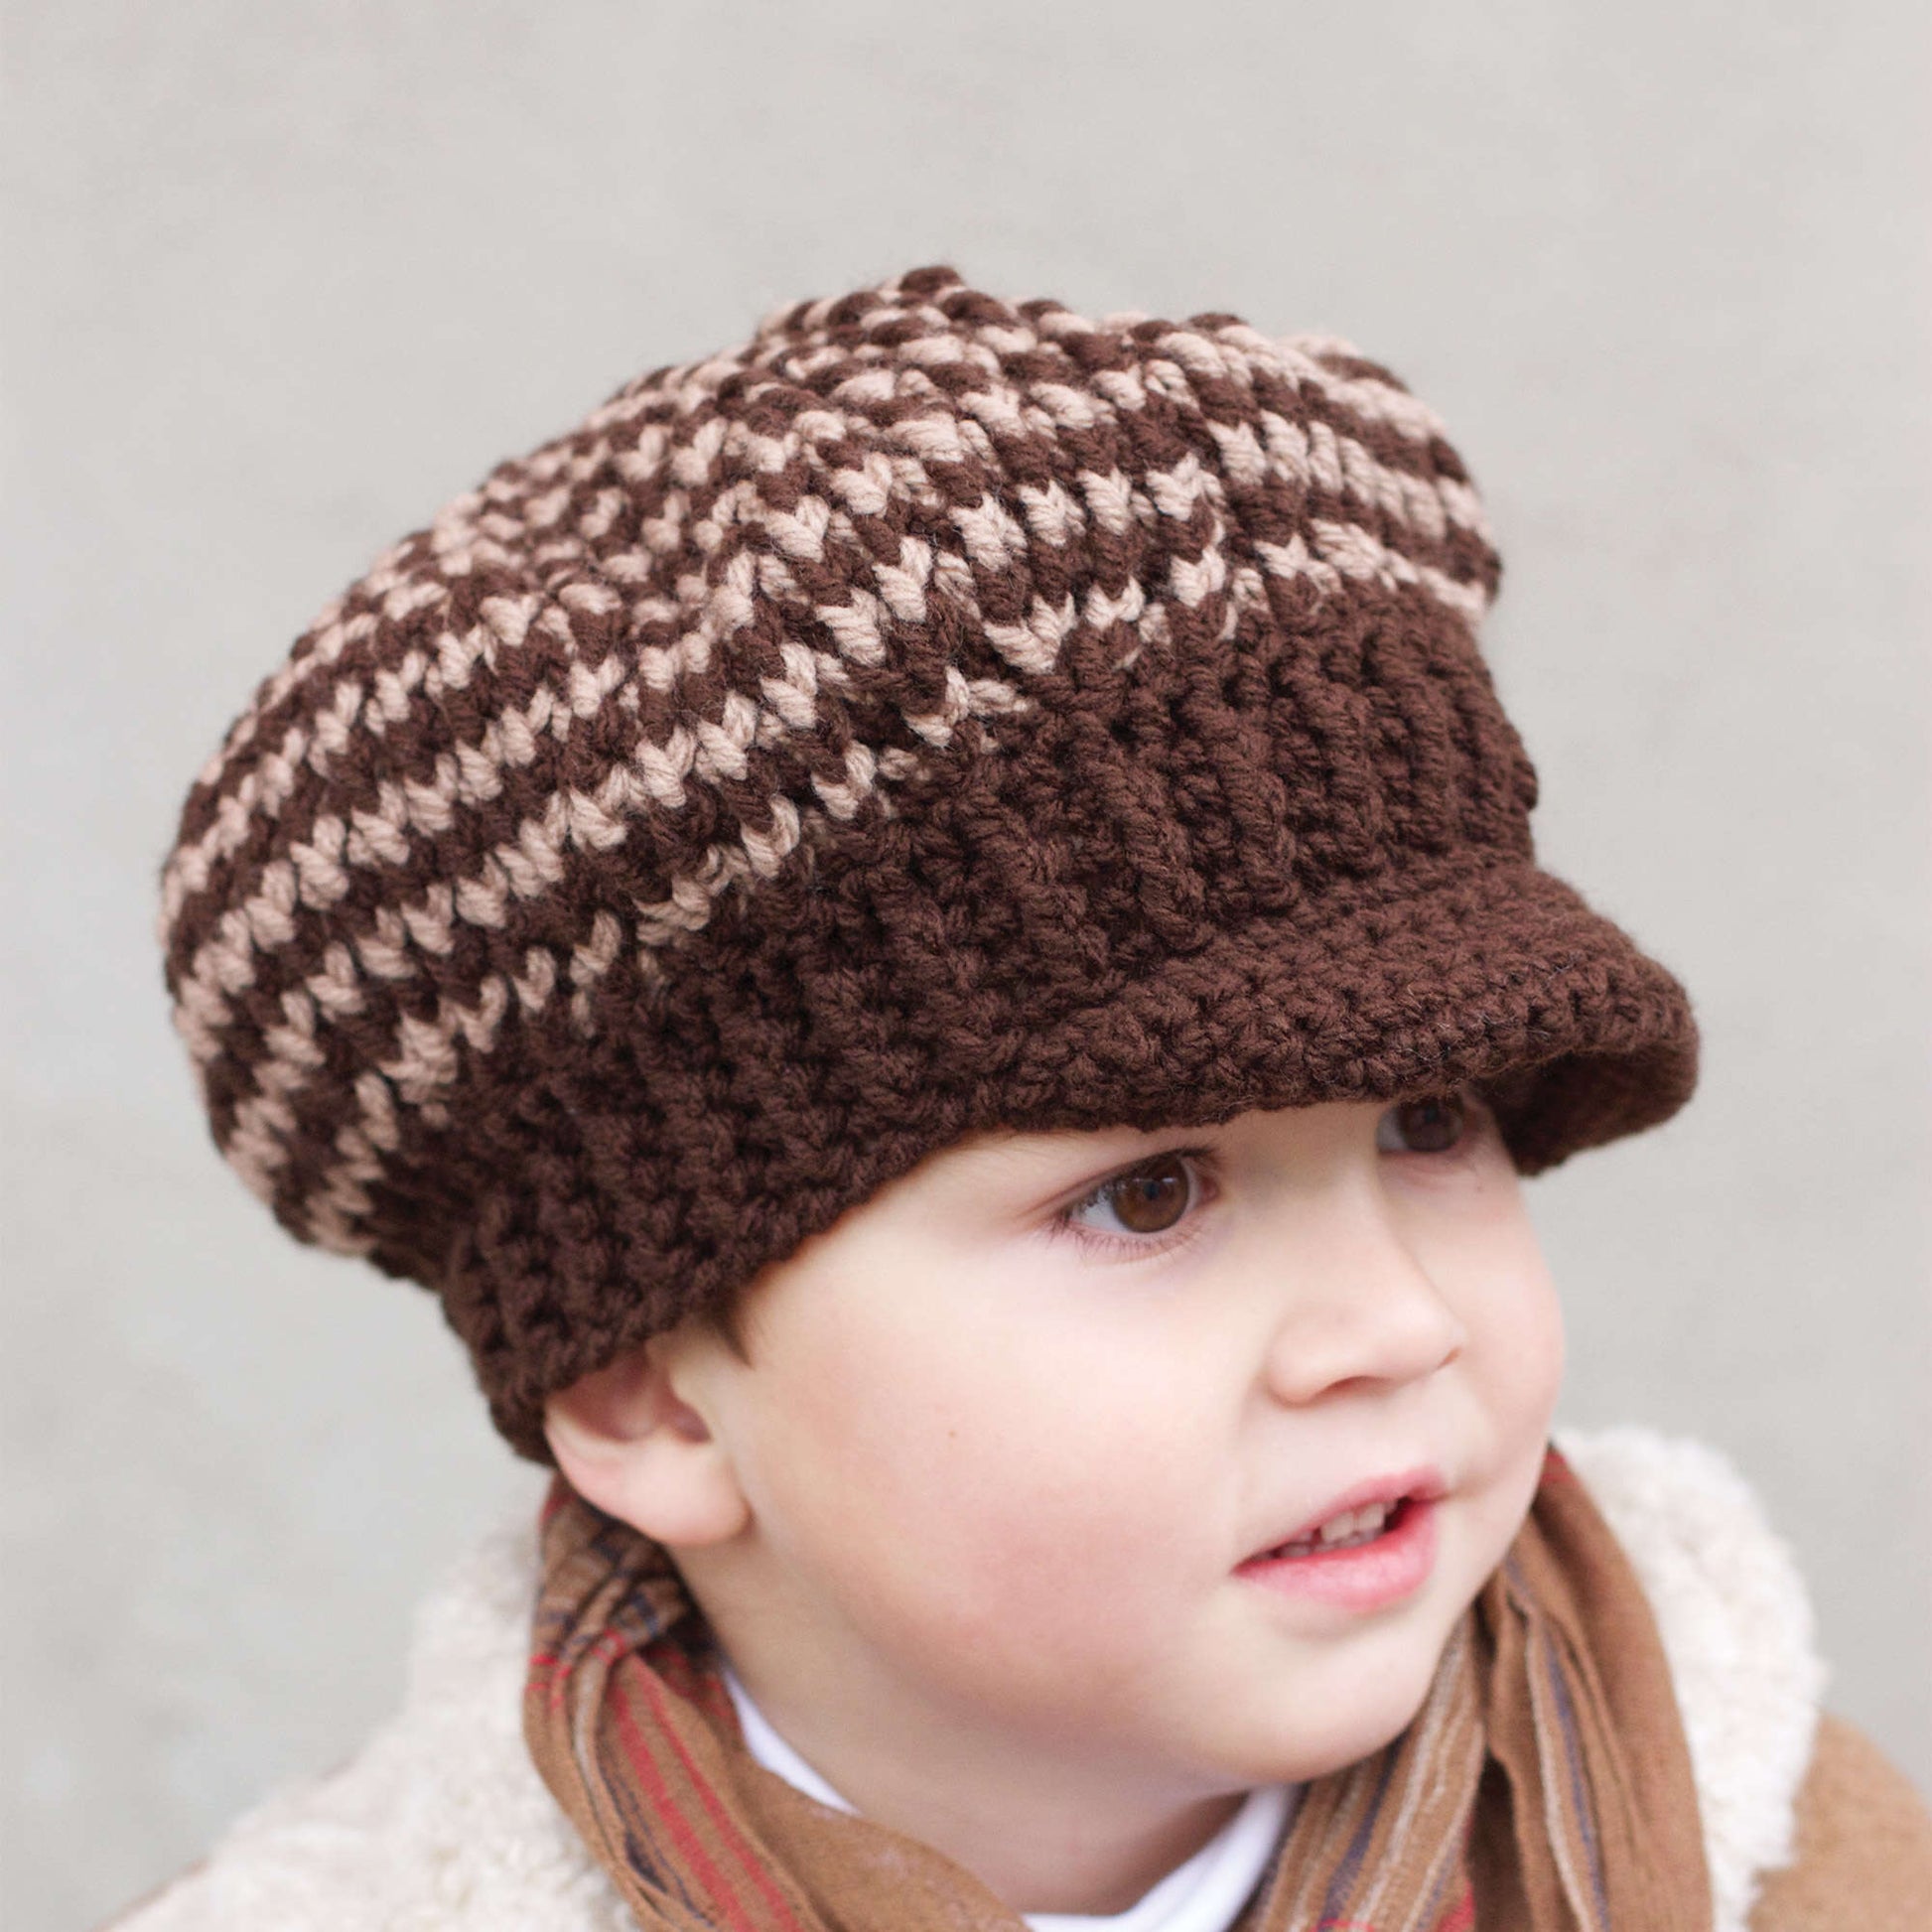 Free Patons Crochet Newsboy's and Girl's Caps Pattern